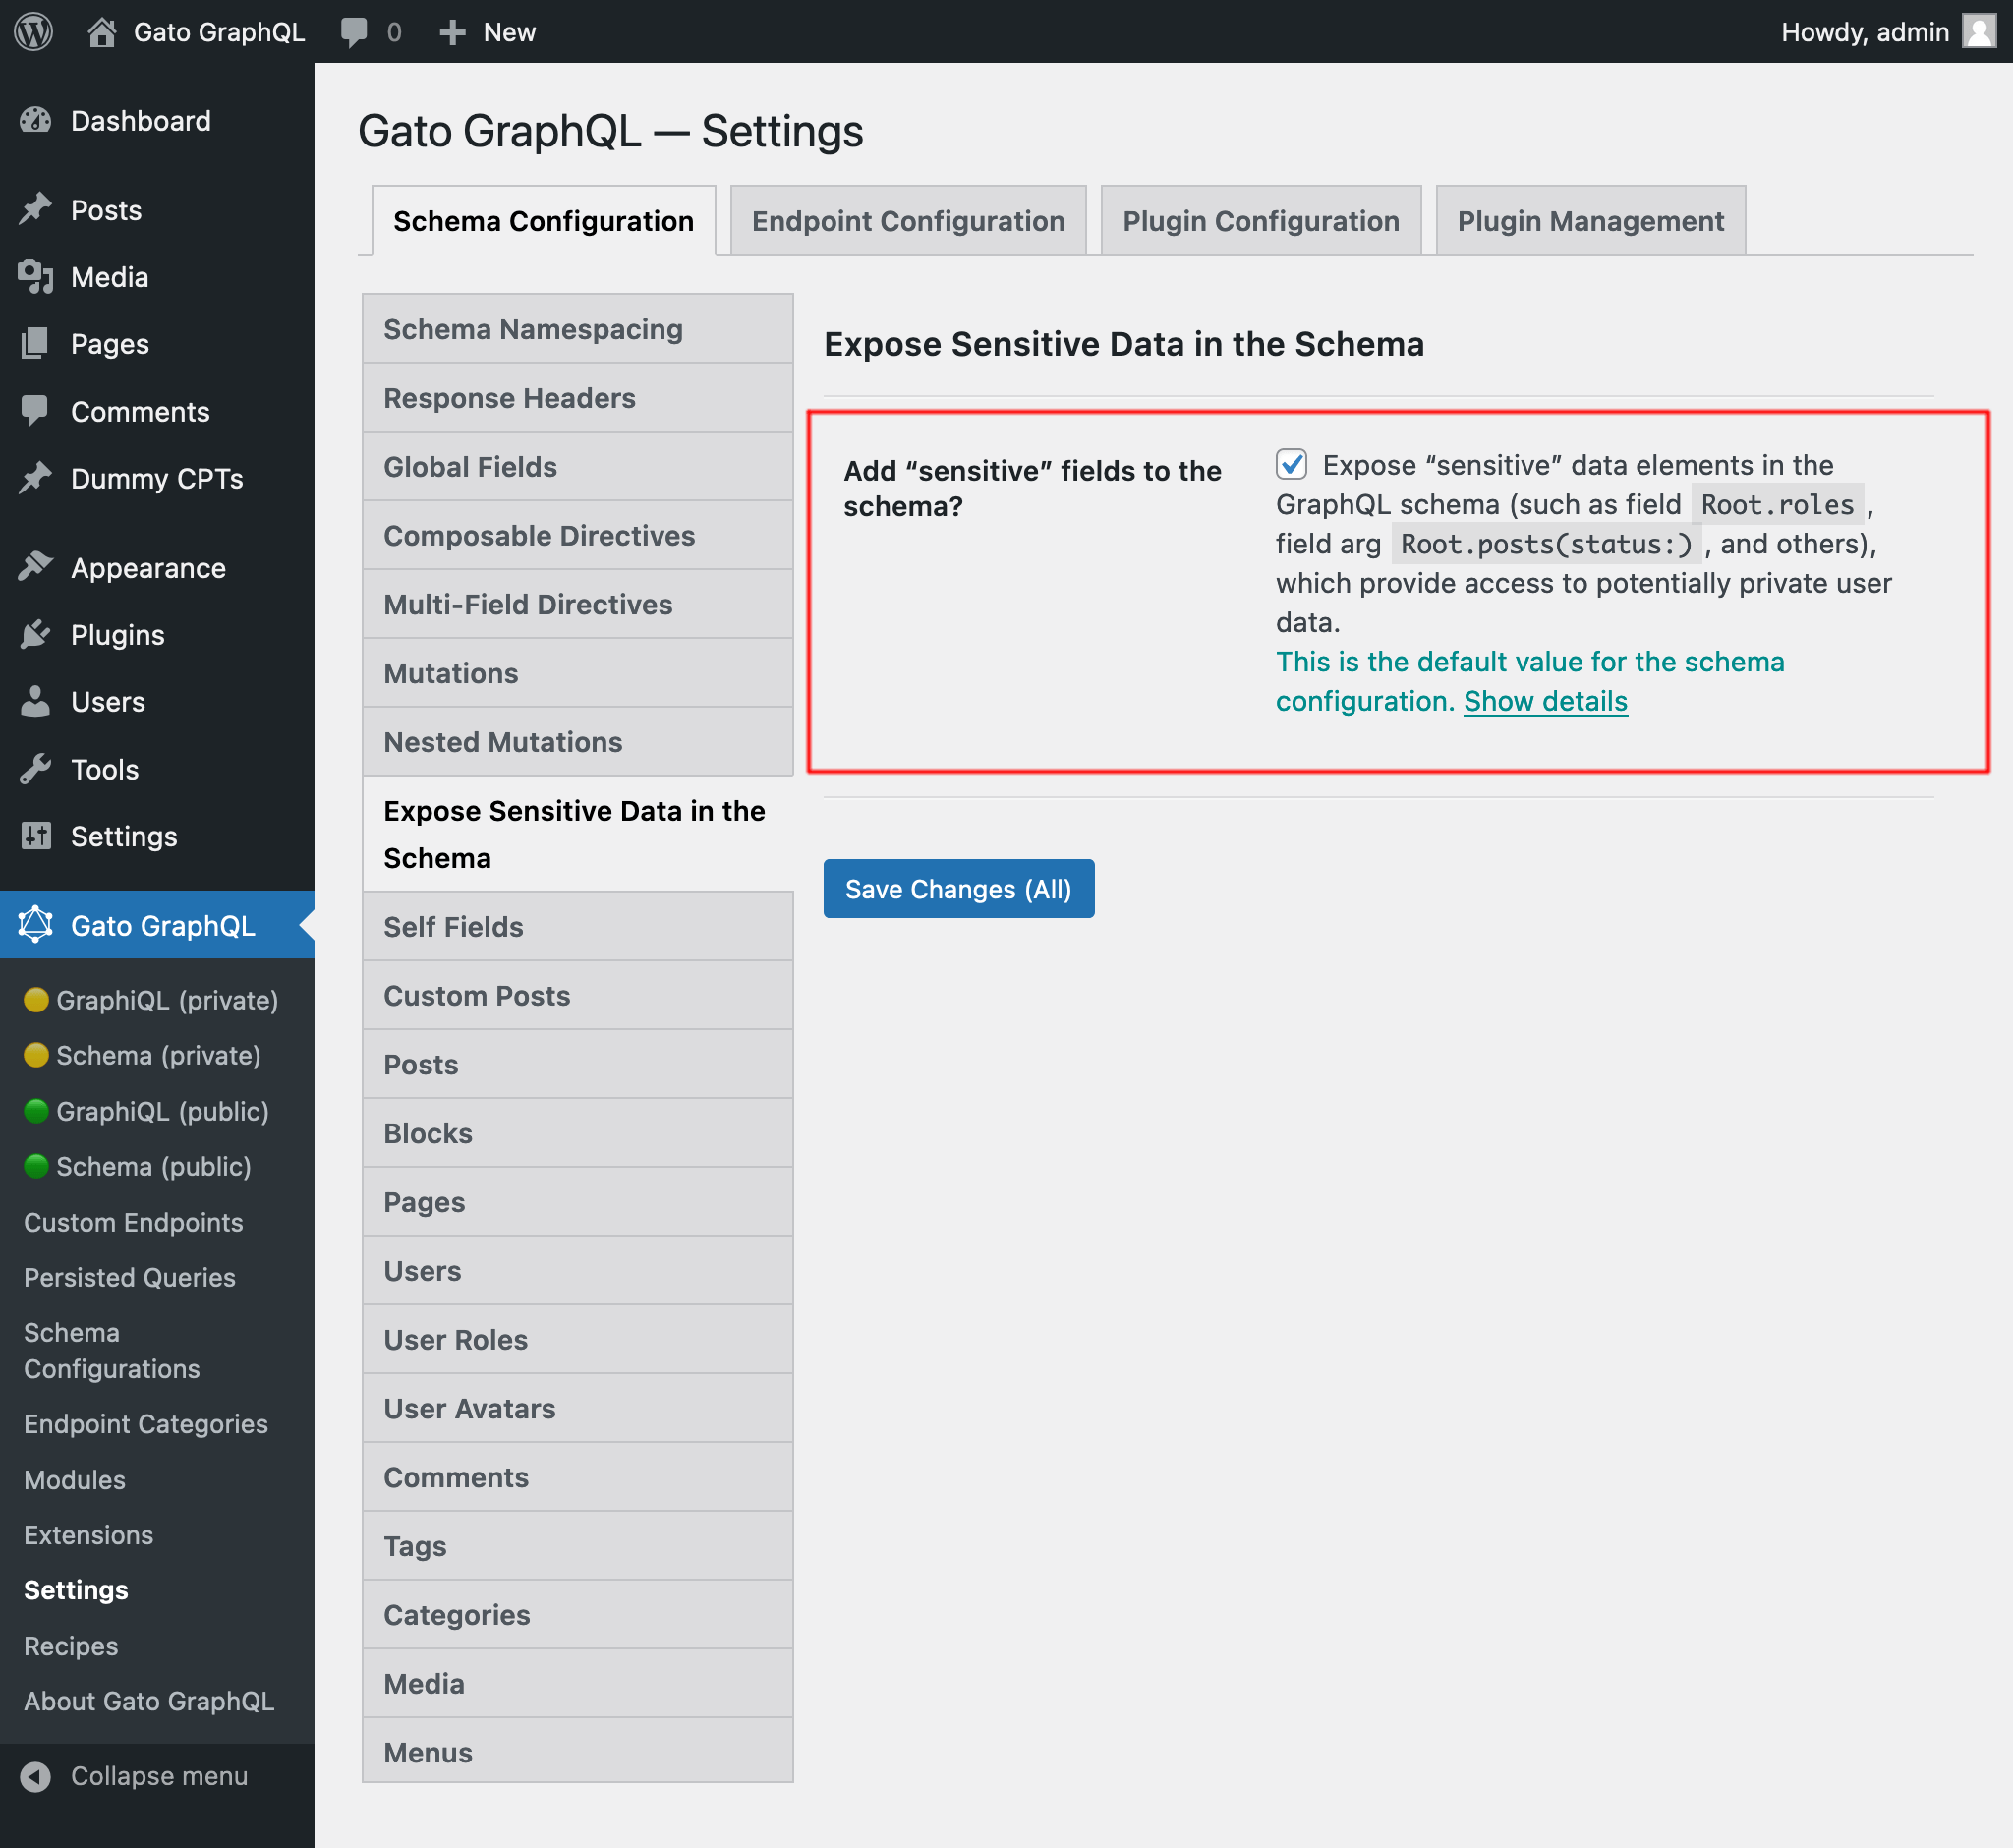 Setting “sensitive” data elements for the schema configuration, in the Settings